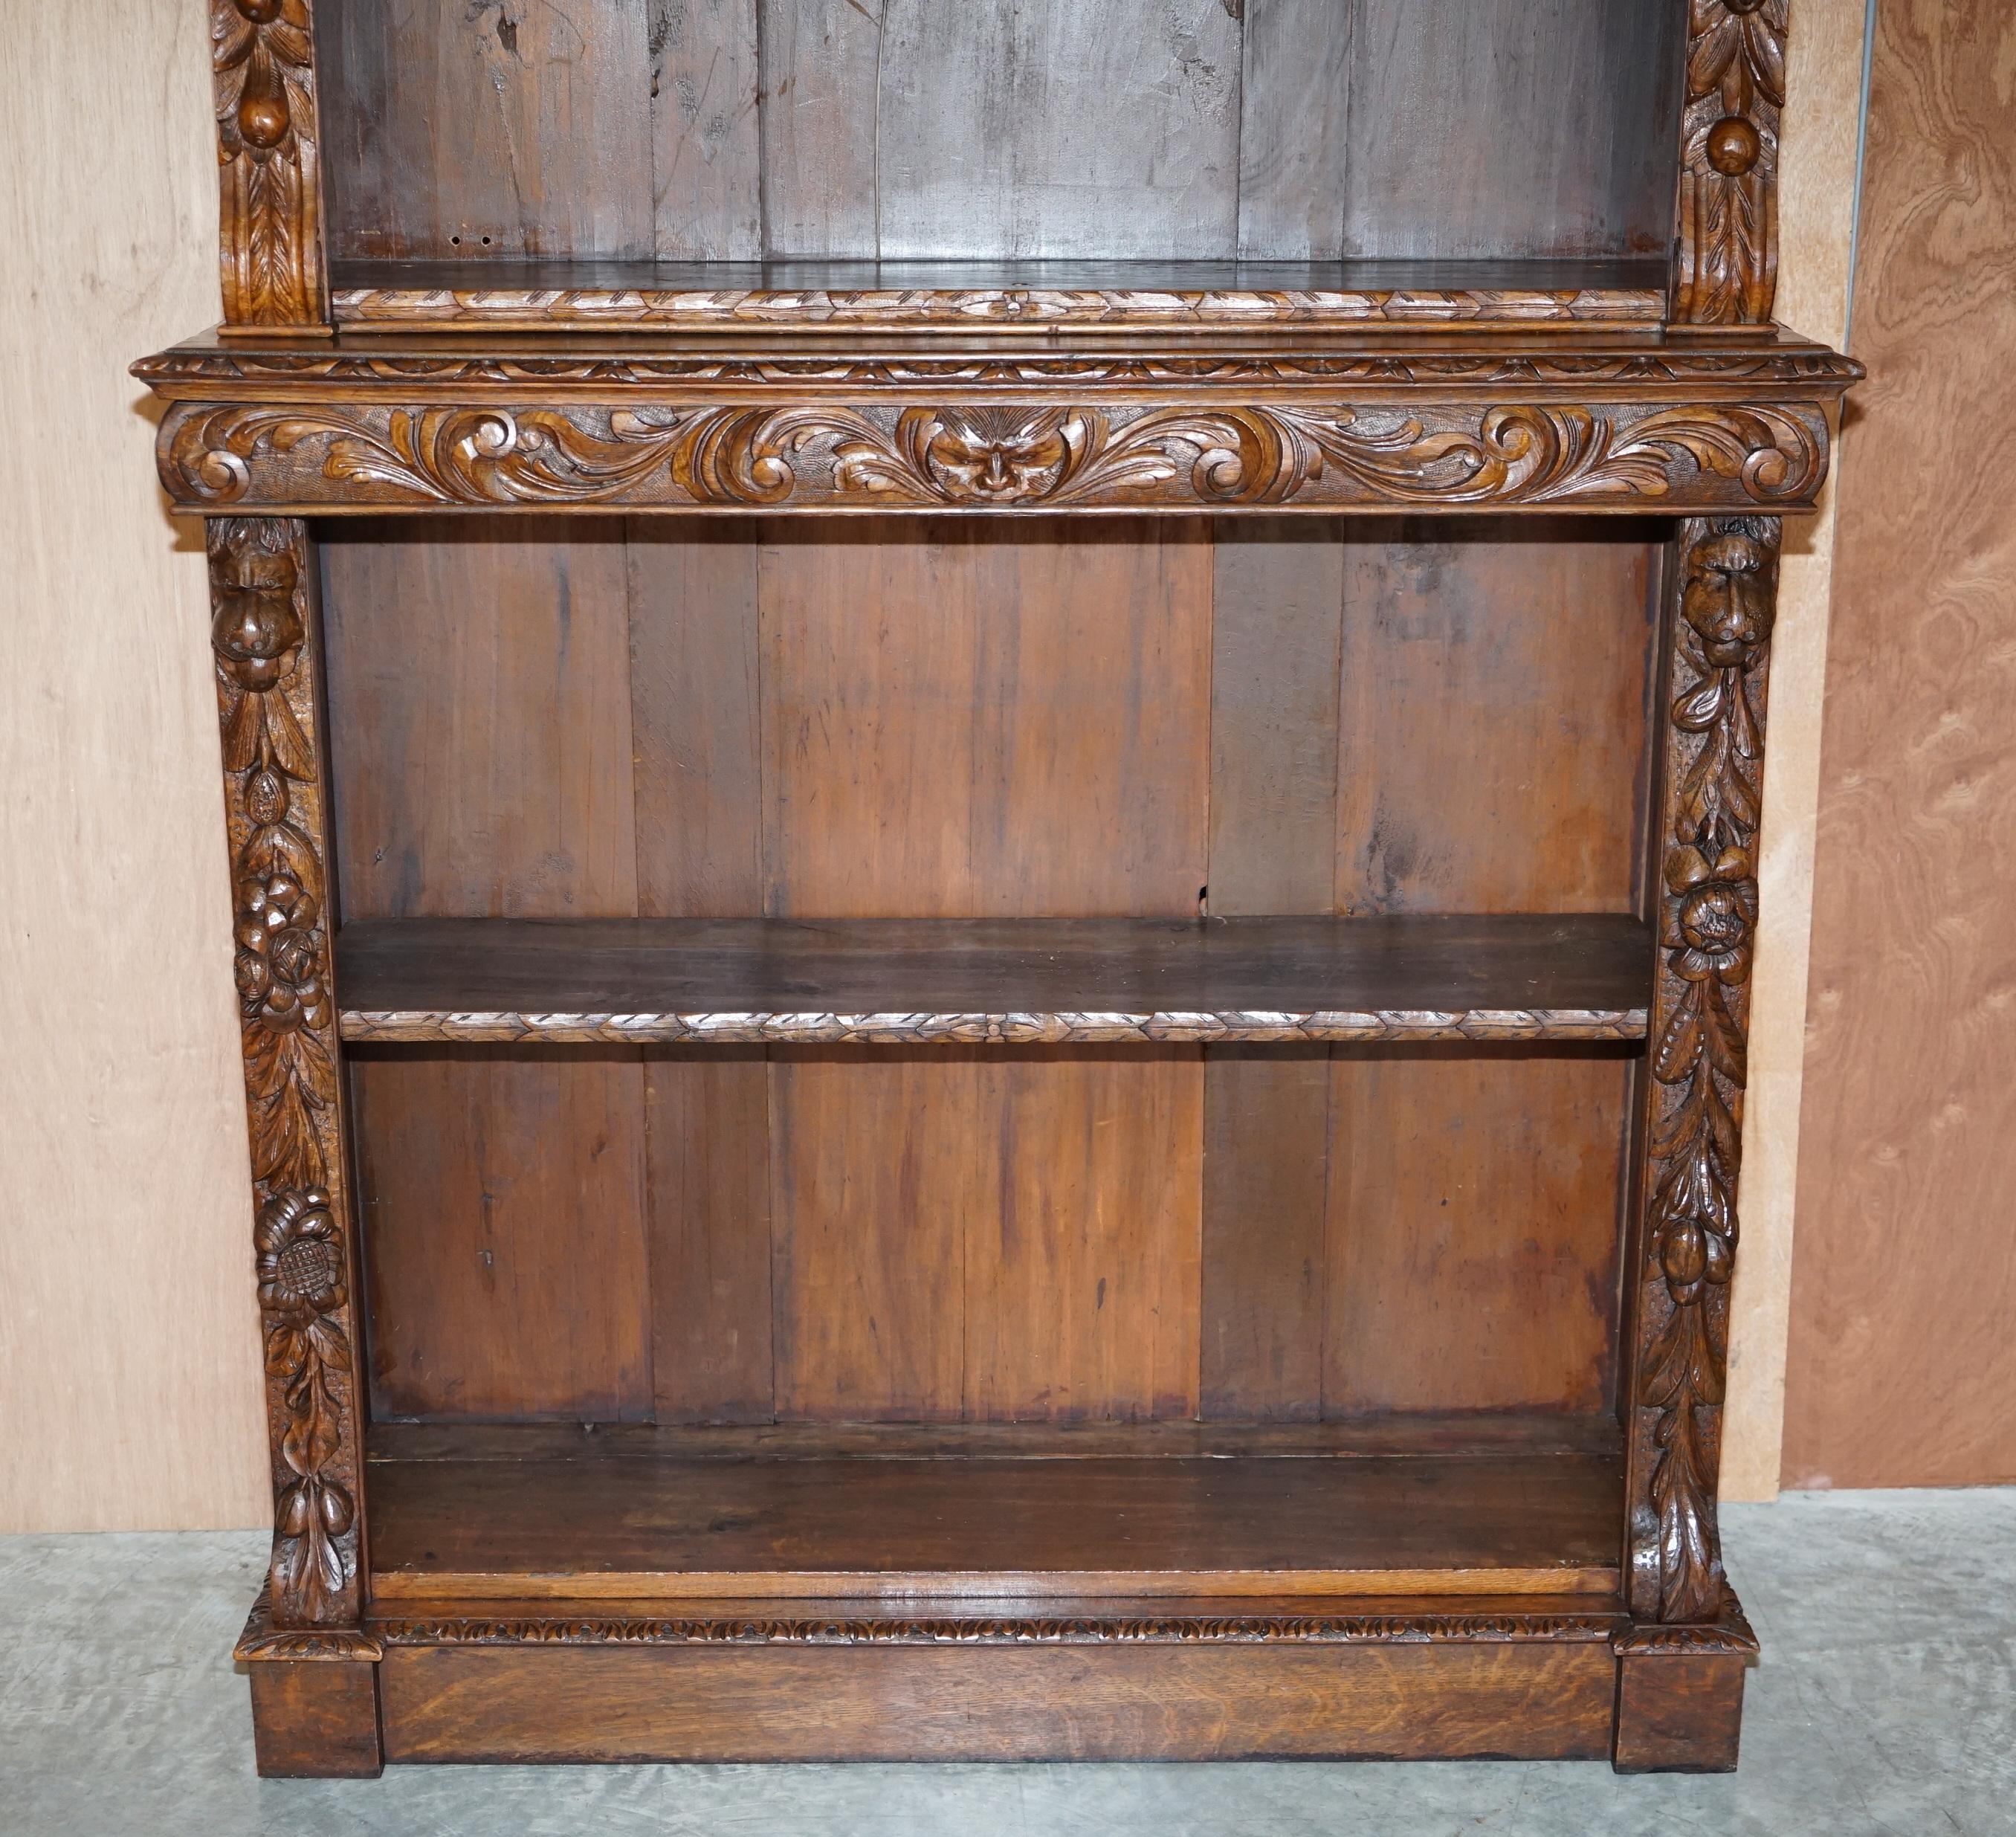 High Victorian Antique Pair of circa 1860 Jacobean Revival English Carved Oak Library Bookcases